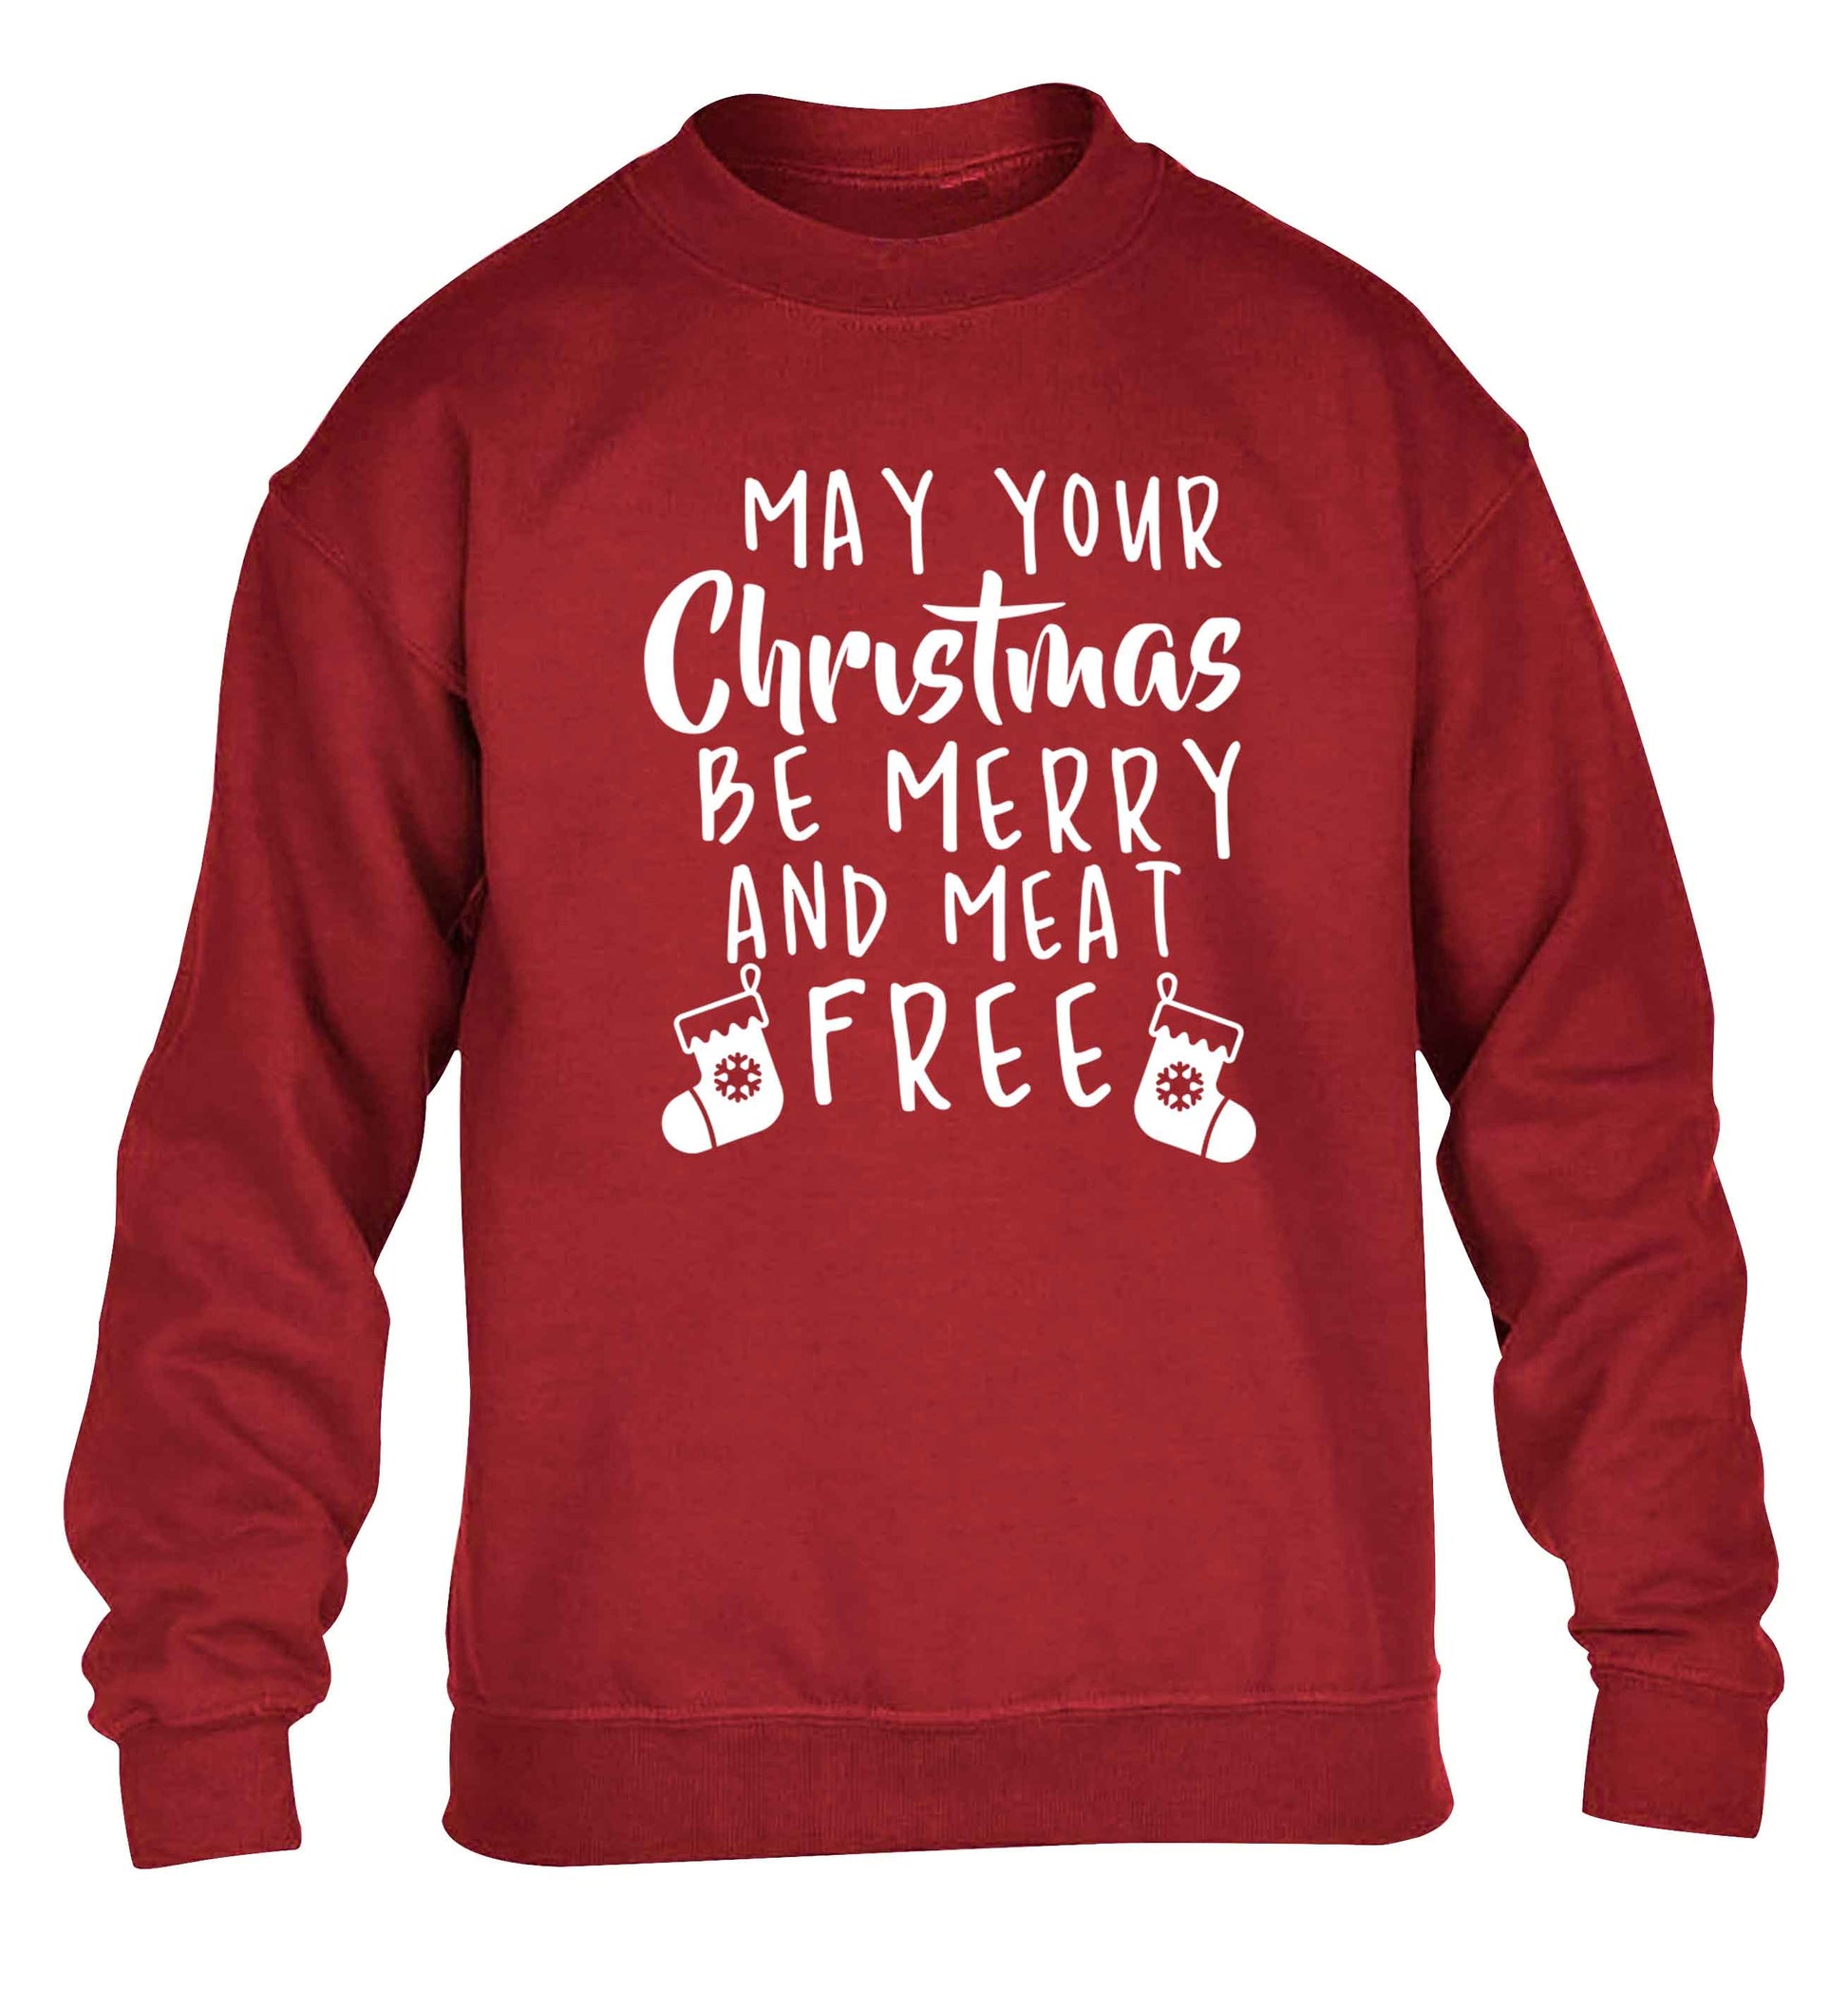 May your Christmas be merry and meat free children's grey sweater 12-13 Years